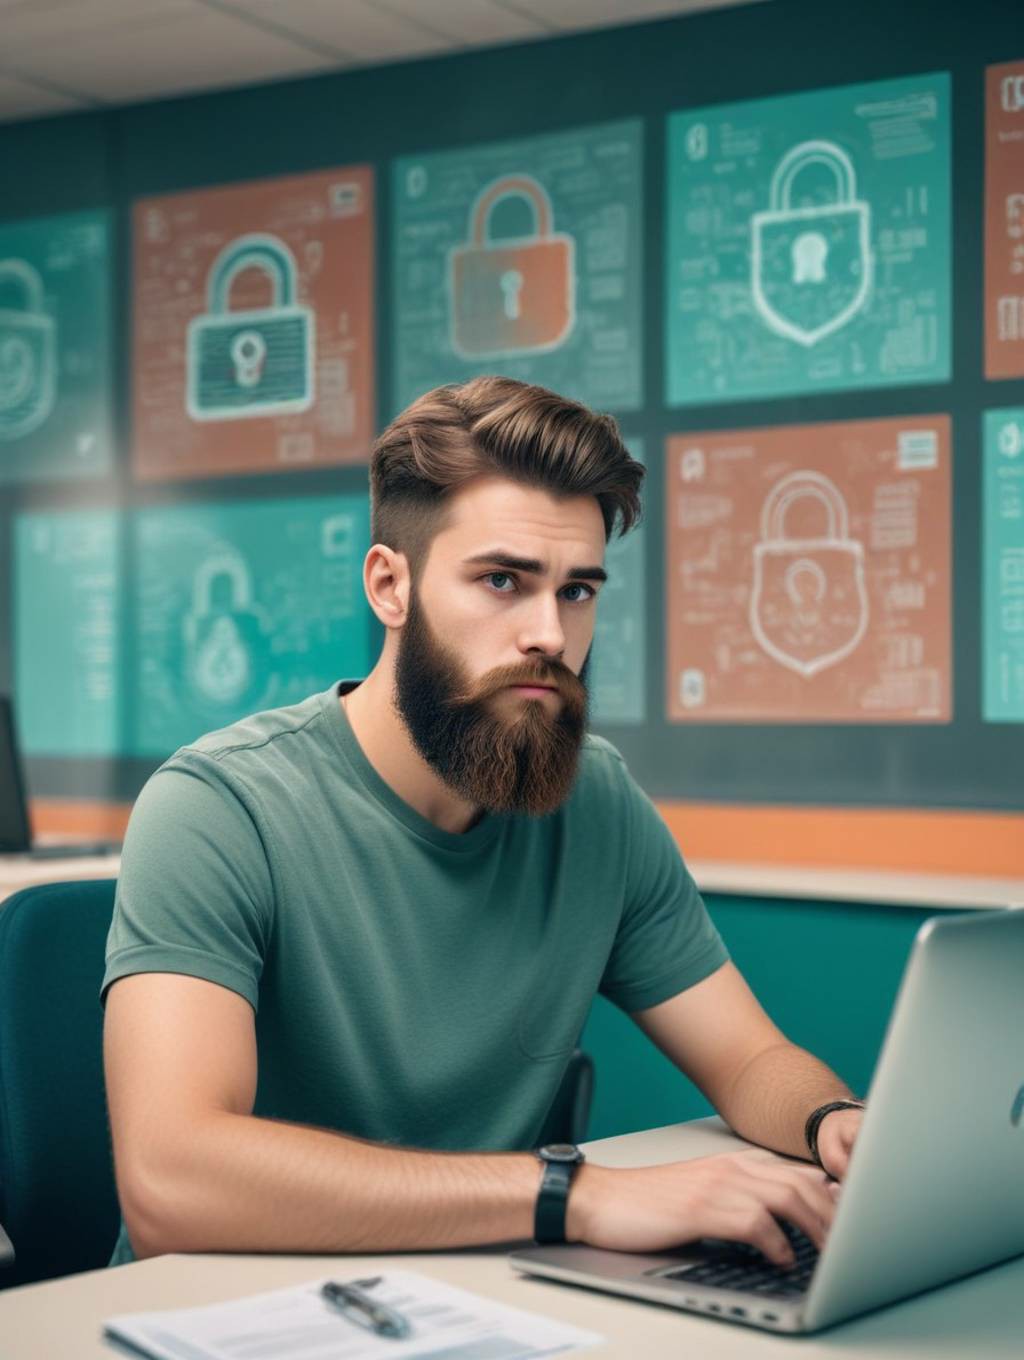 Cybersecurity Men: Gallery Frames & Profile Pictures-Theme:3